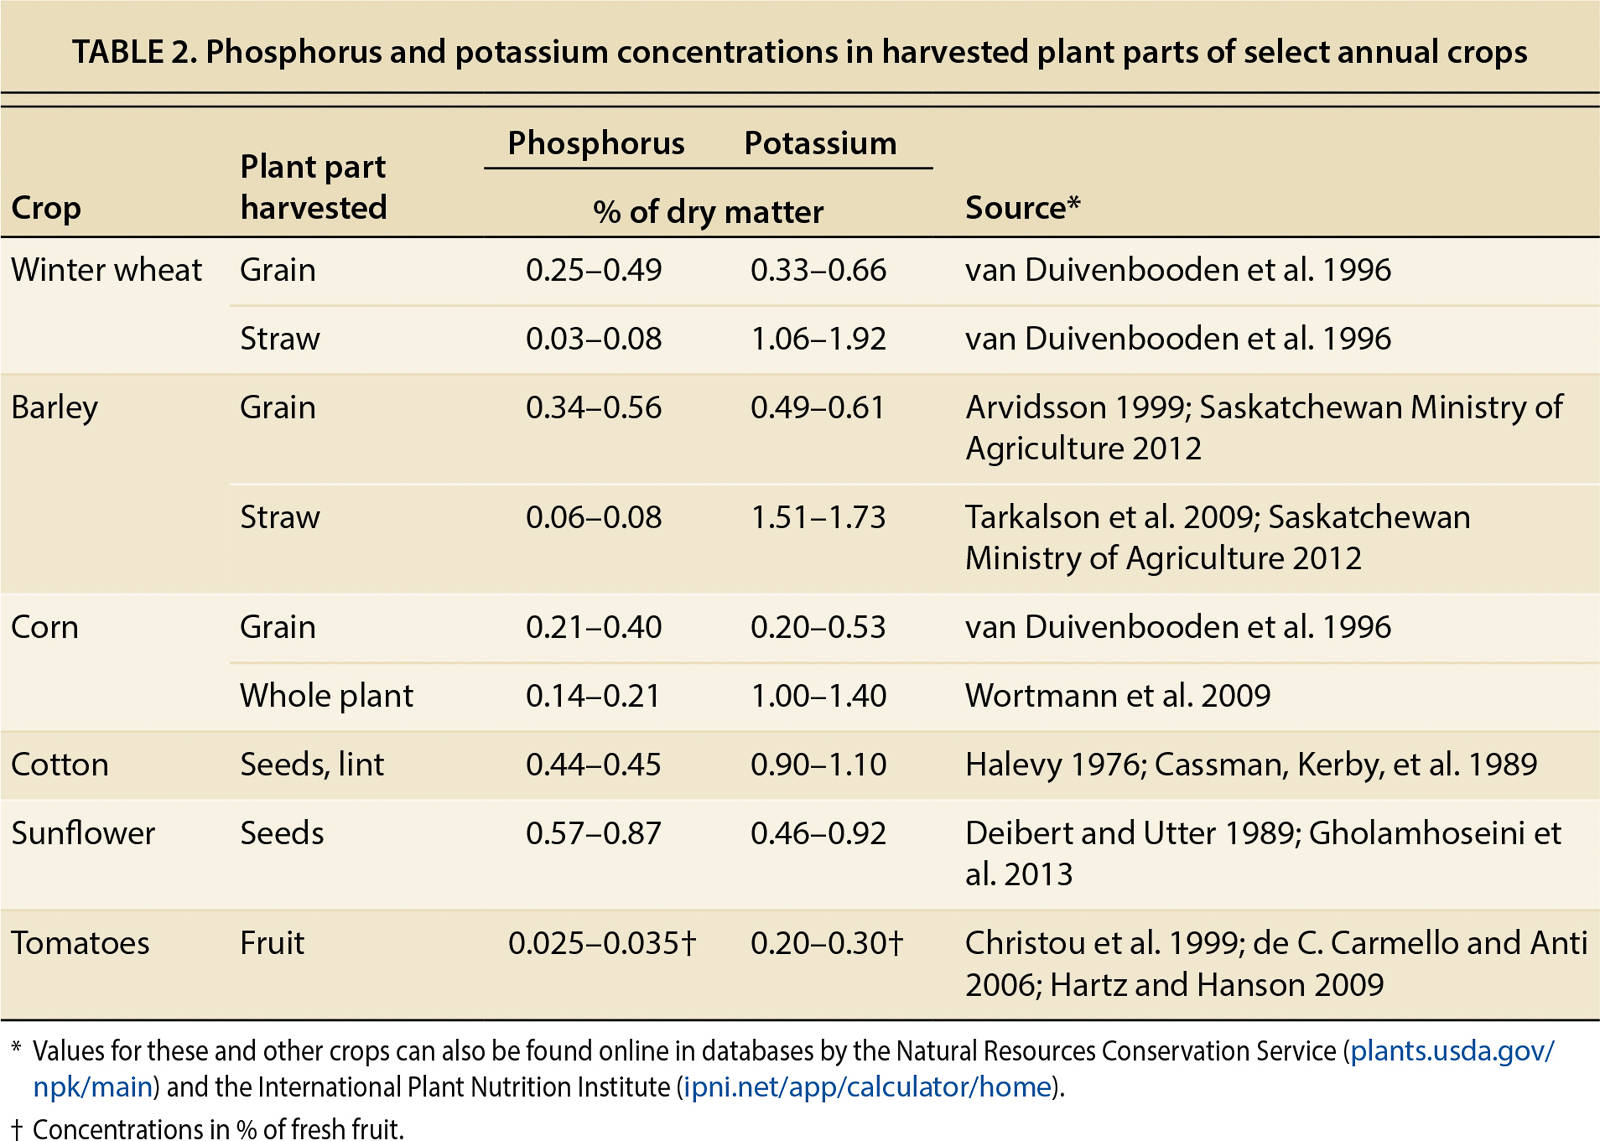 Phosphorus and potassium concentrations in harvested plant parts of select annual crops